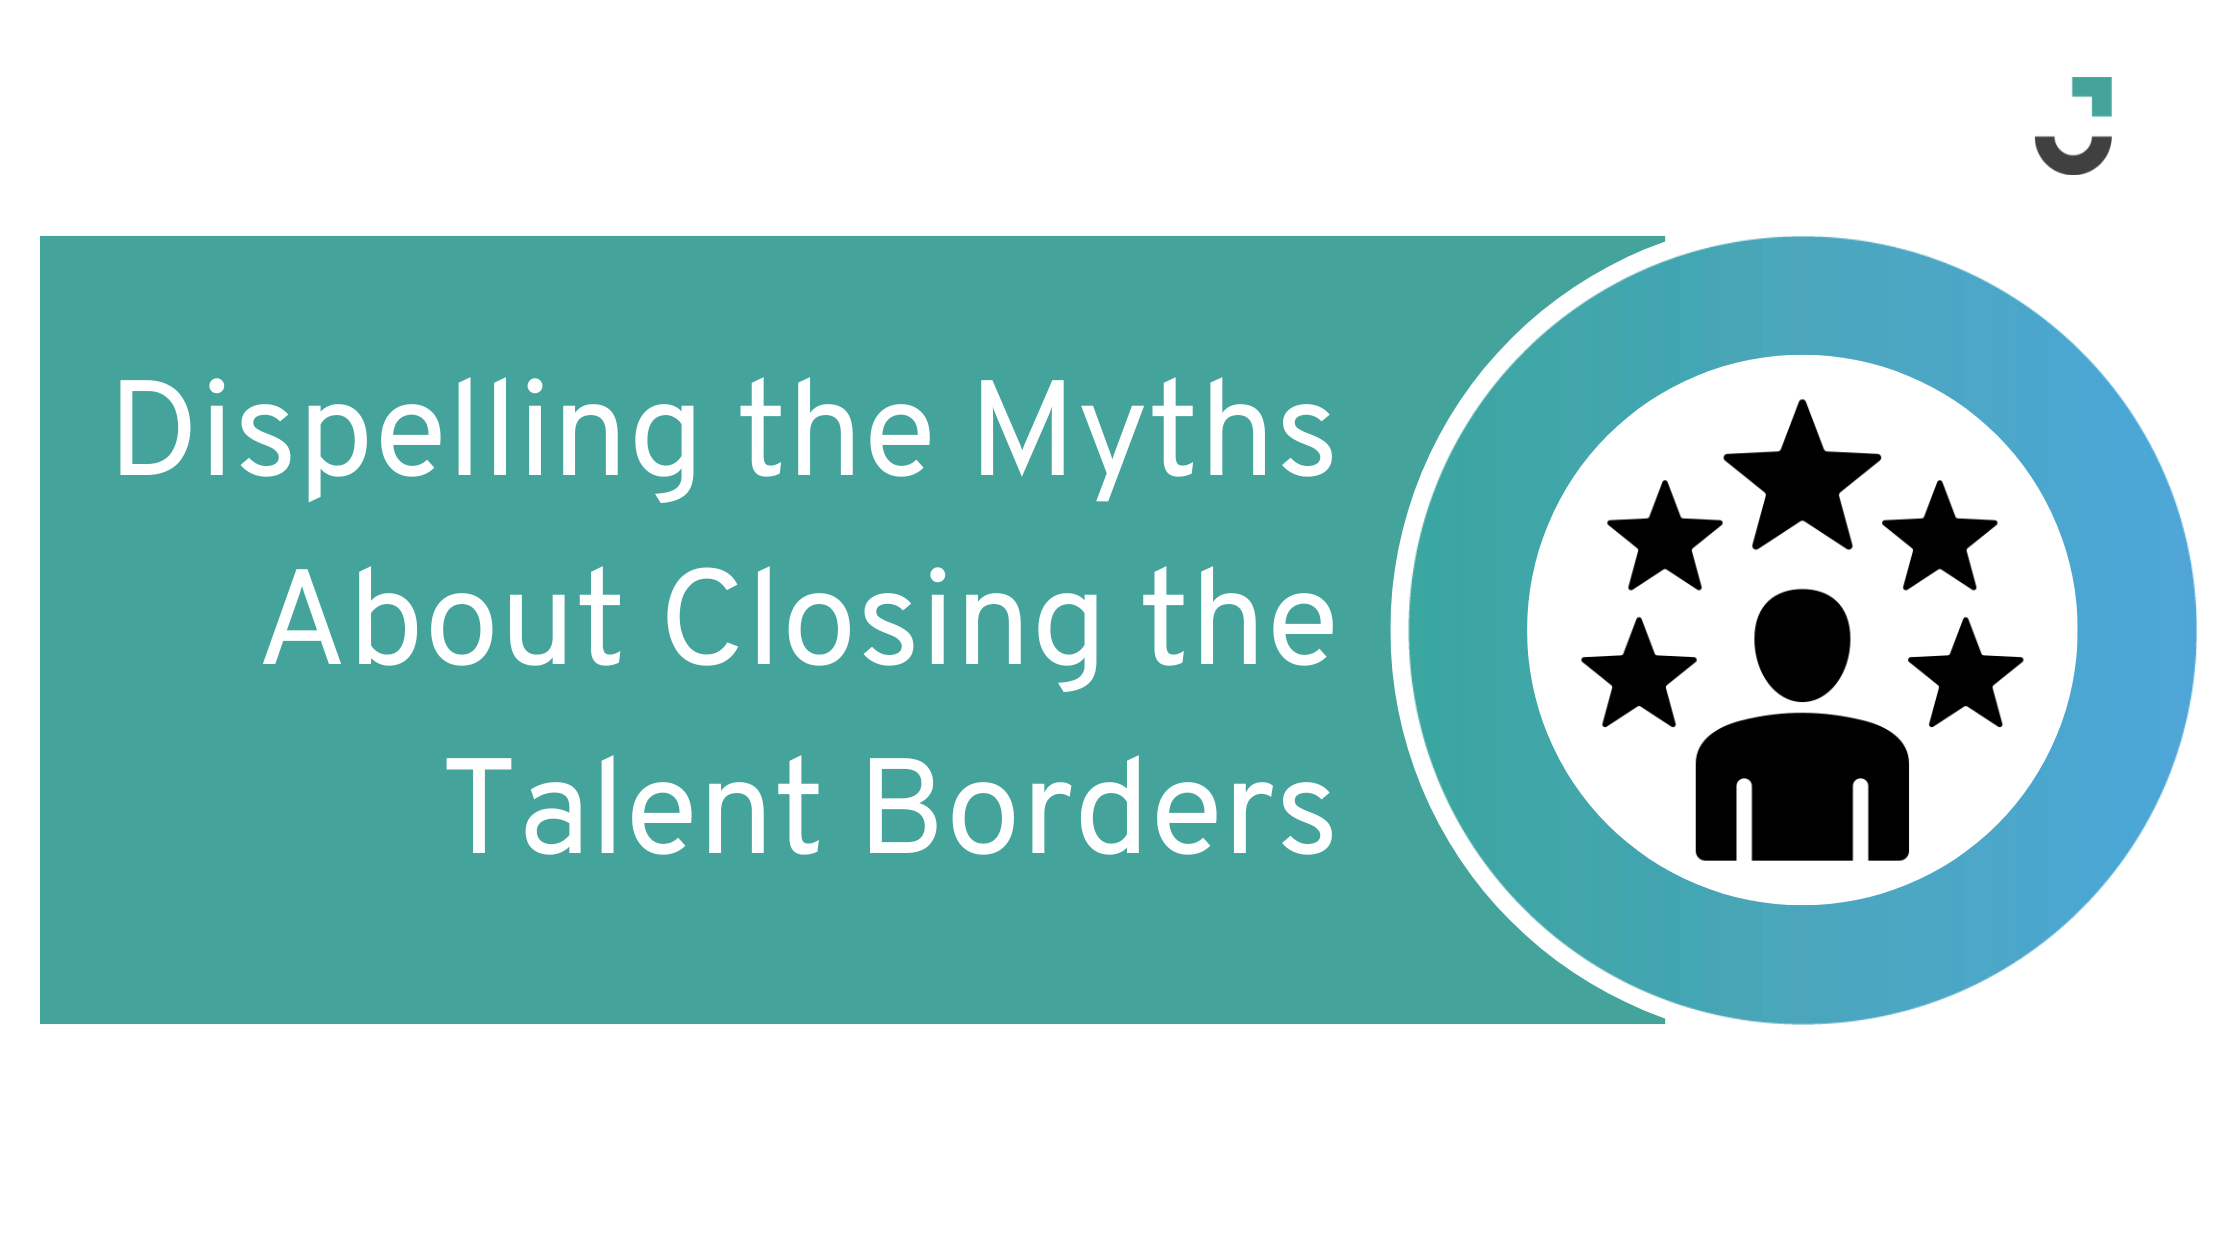 Dispelling the Myths About Closing the Talent Borders